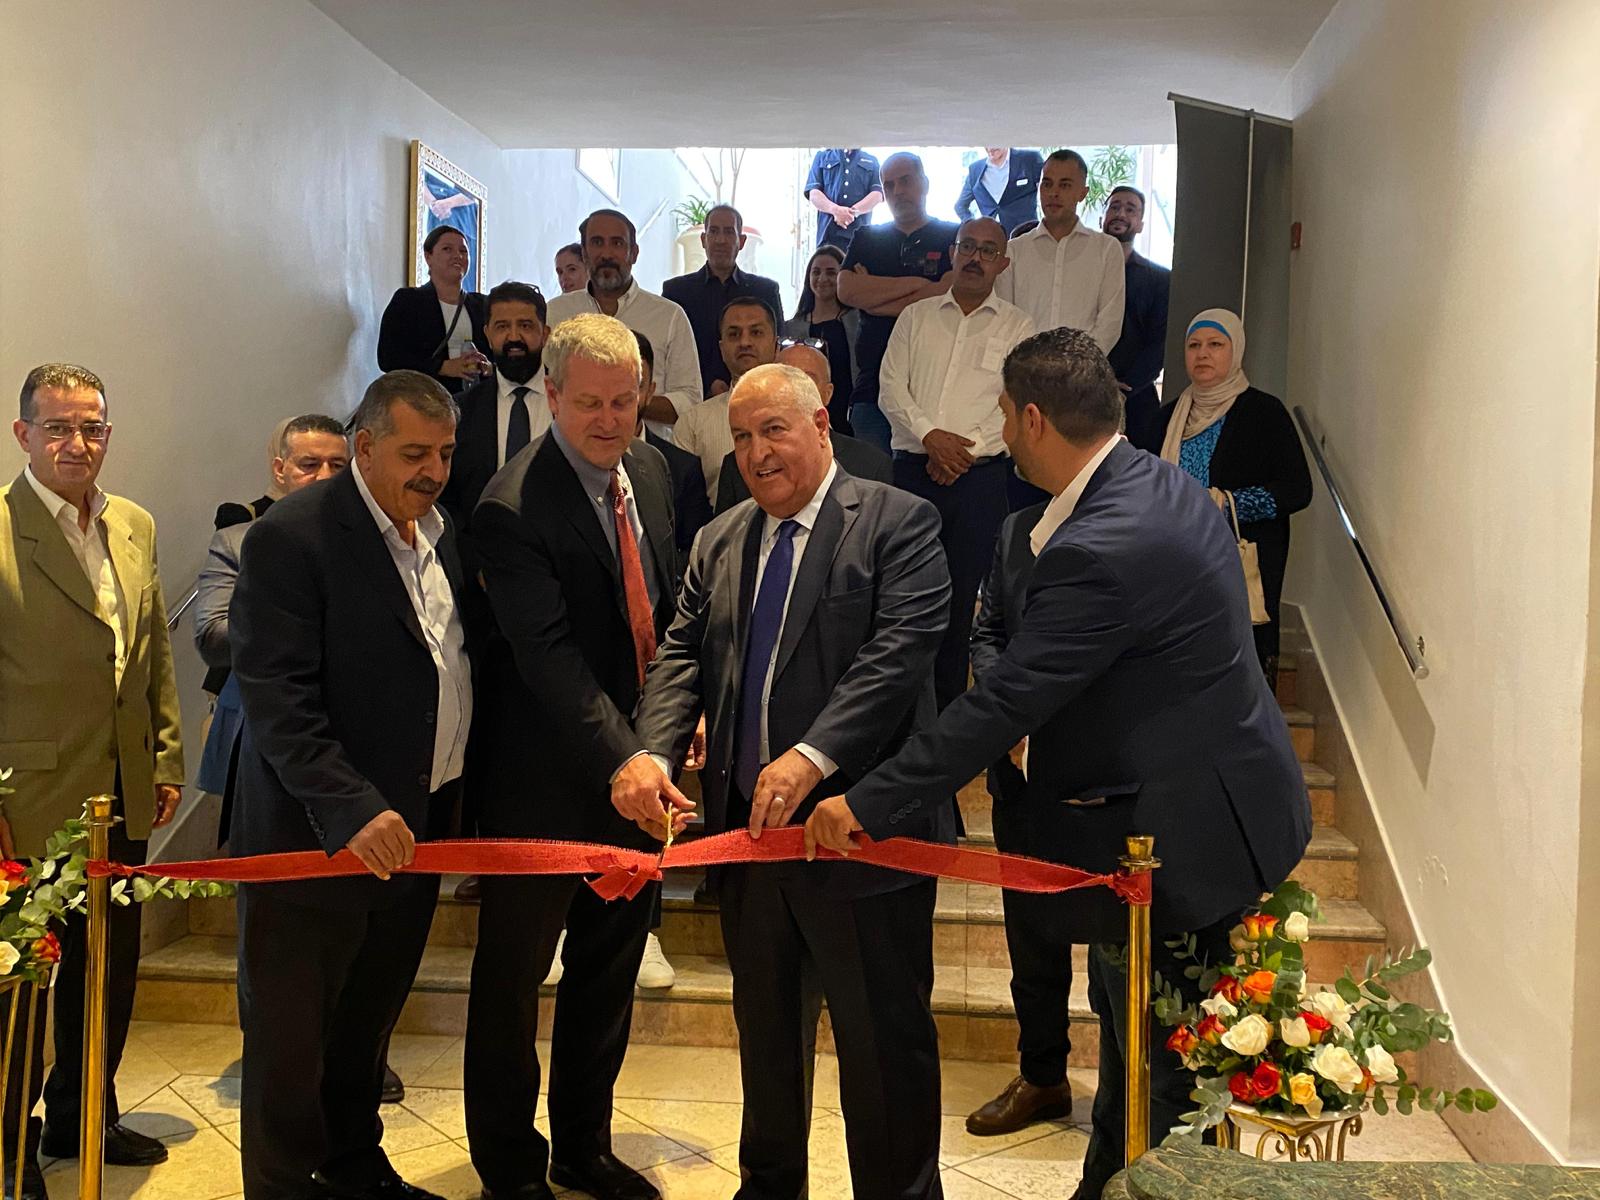 Sinokrot Global for Markets Development Completes Its Participation in Its 9th Edition of The Coffee and Chocolate Exhibition, Which Was Held for The First Time in The Palestinian Capital City, Jerusalem, For the Year 2023.